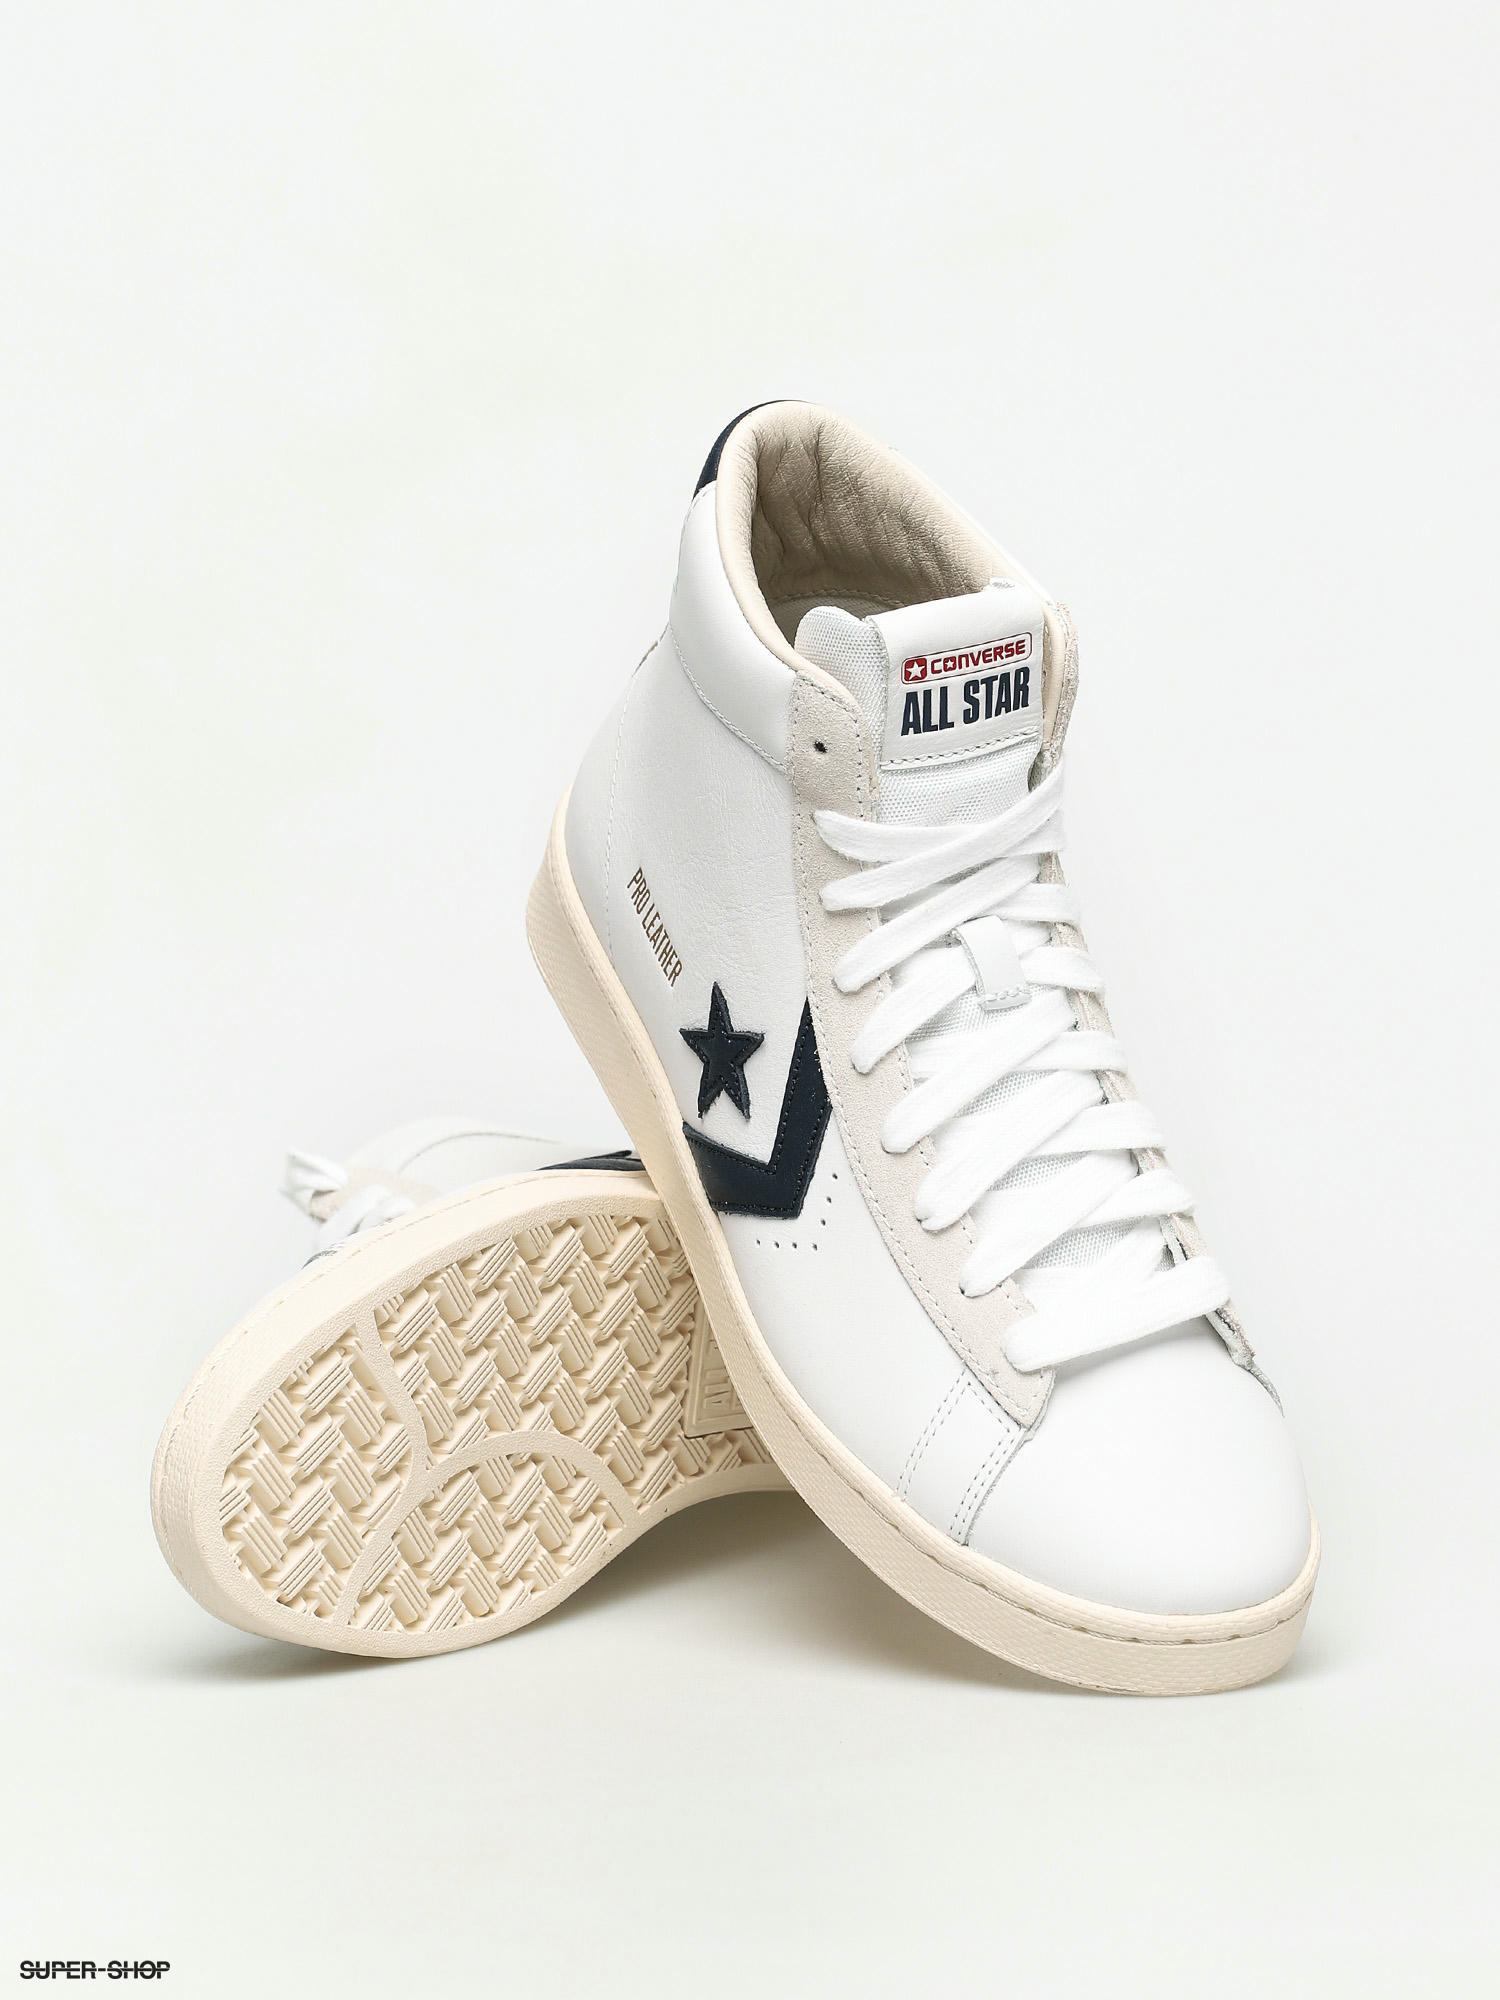 the converse pro leather